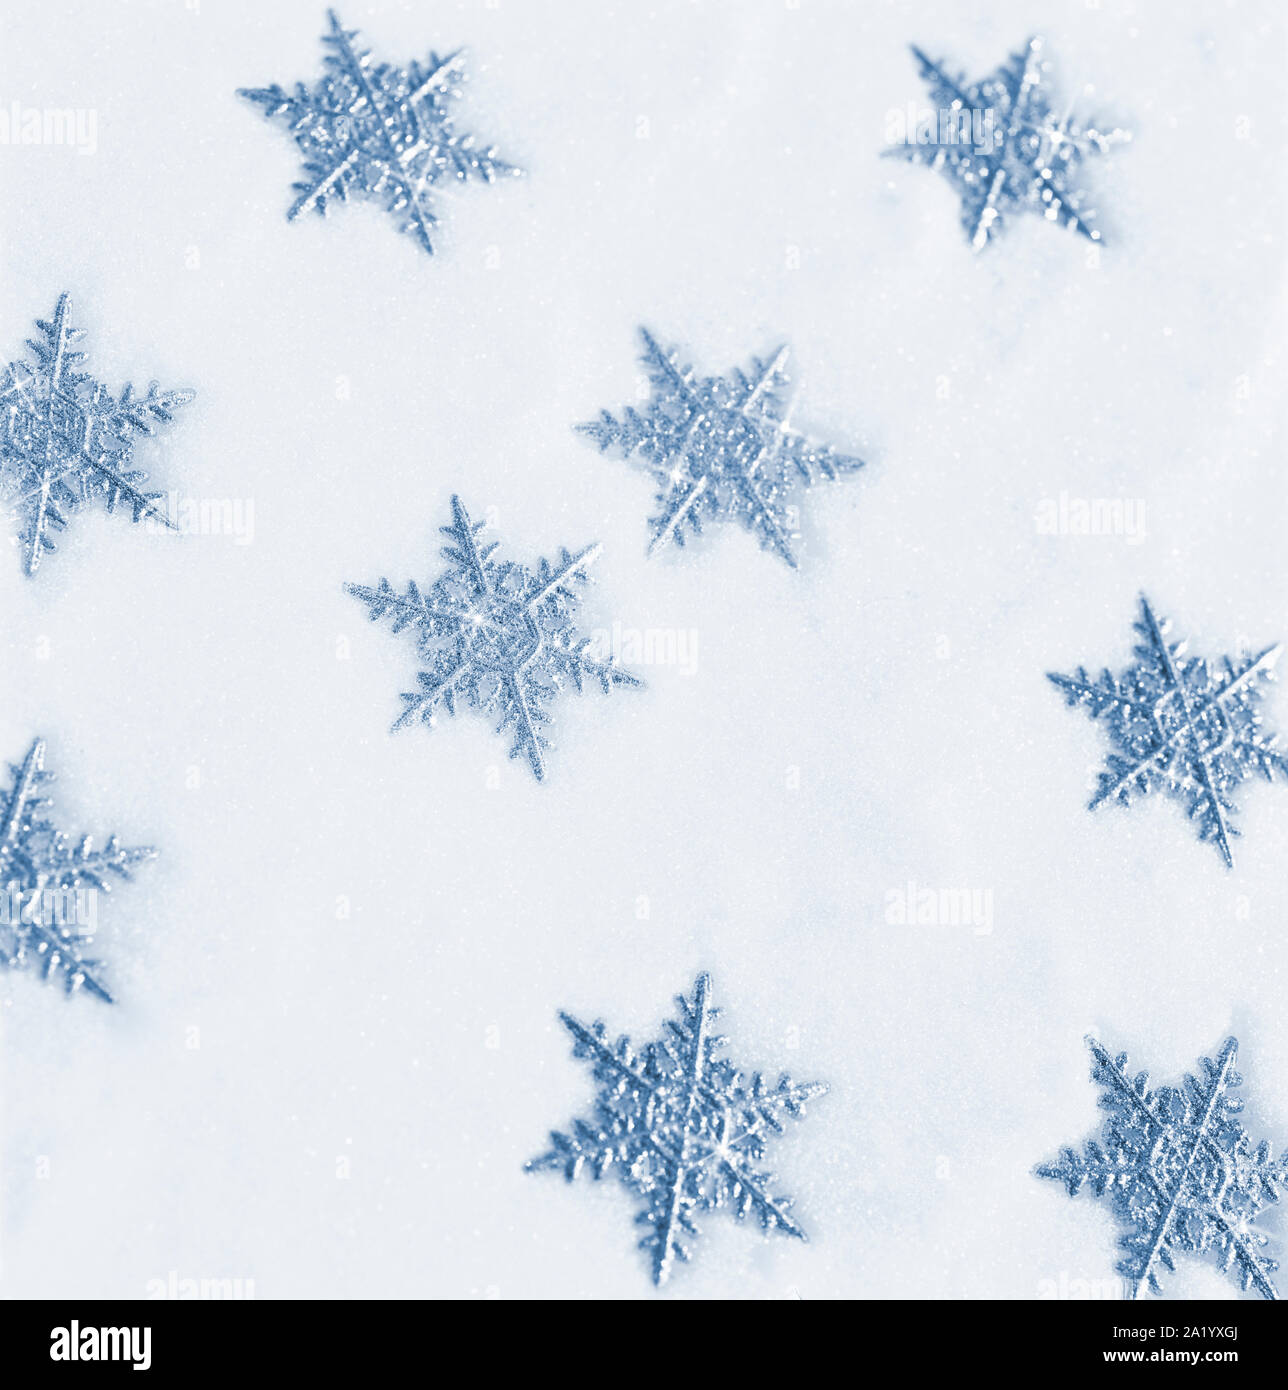 Simple, modern, silver glitter snowflake ornaments decorations on white snow background Stock Photo